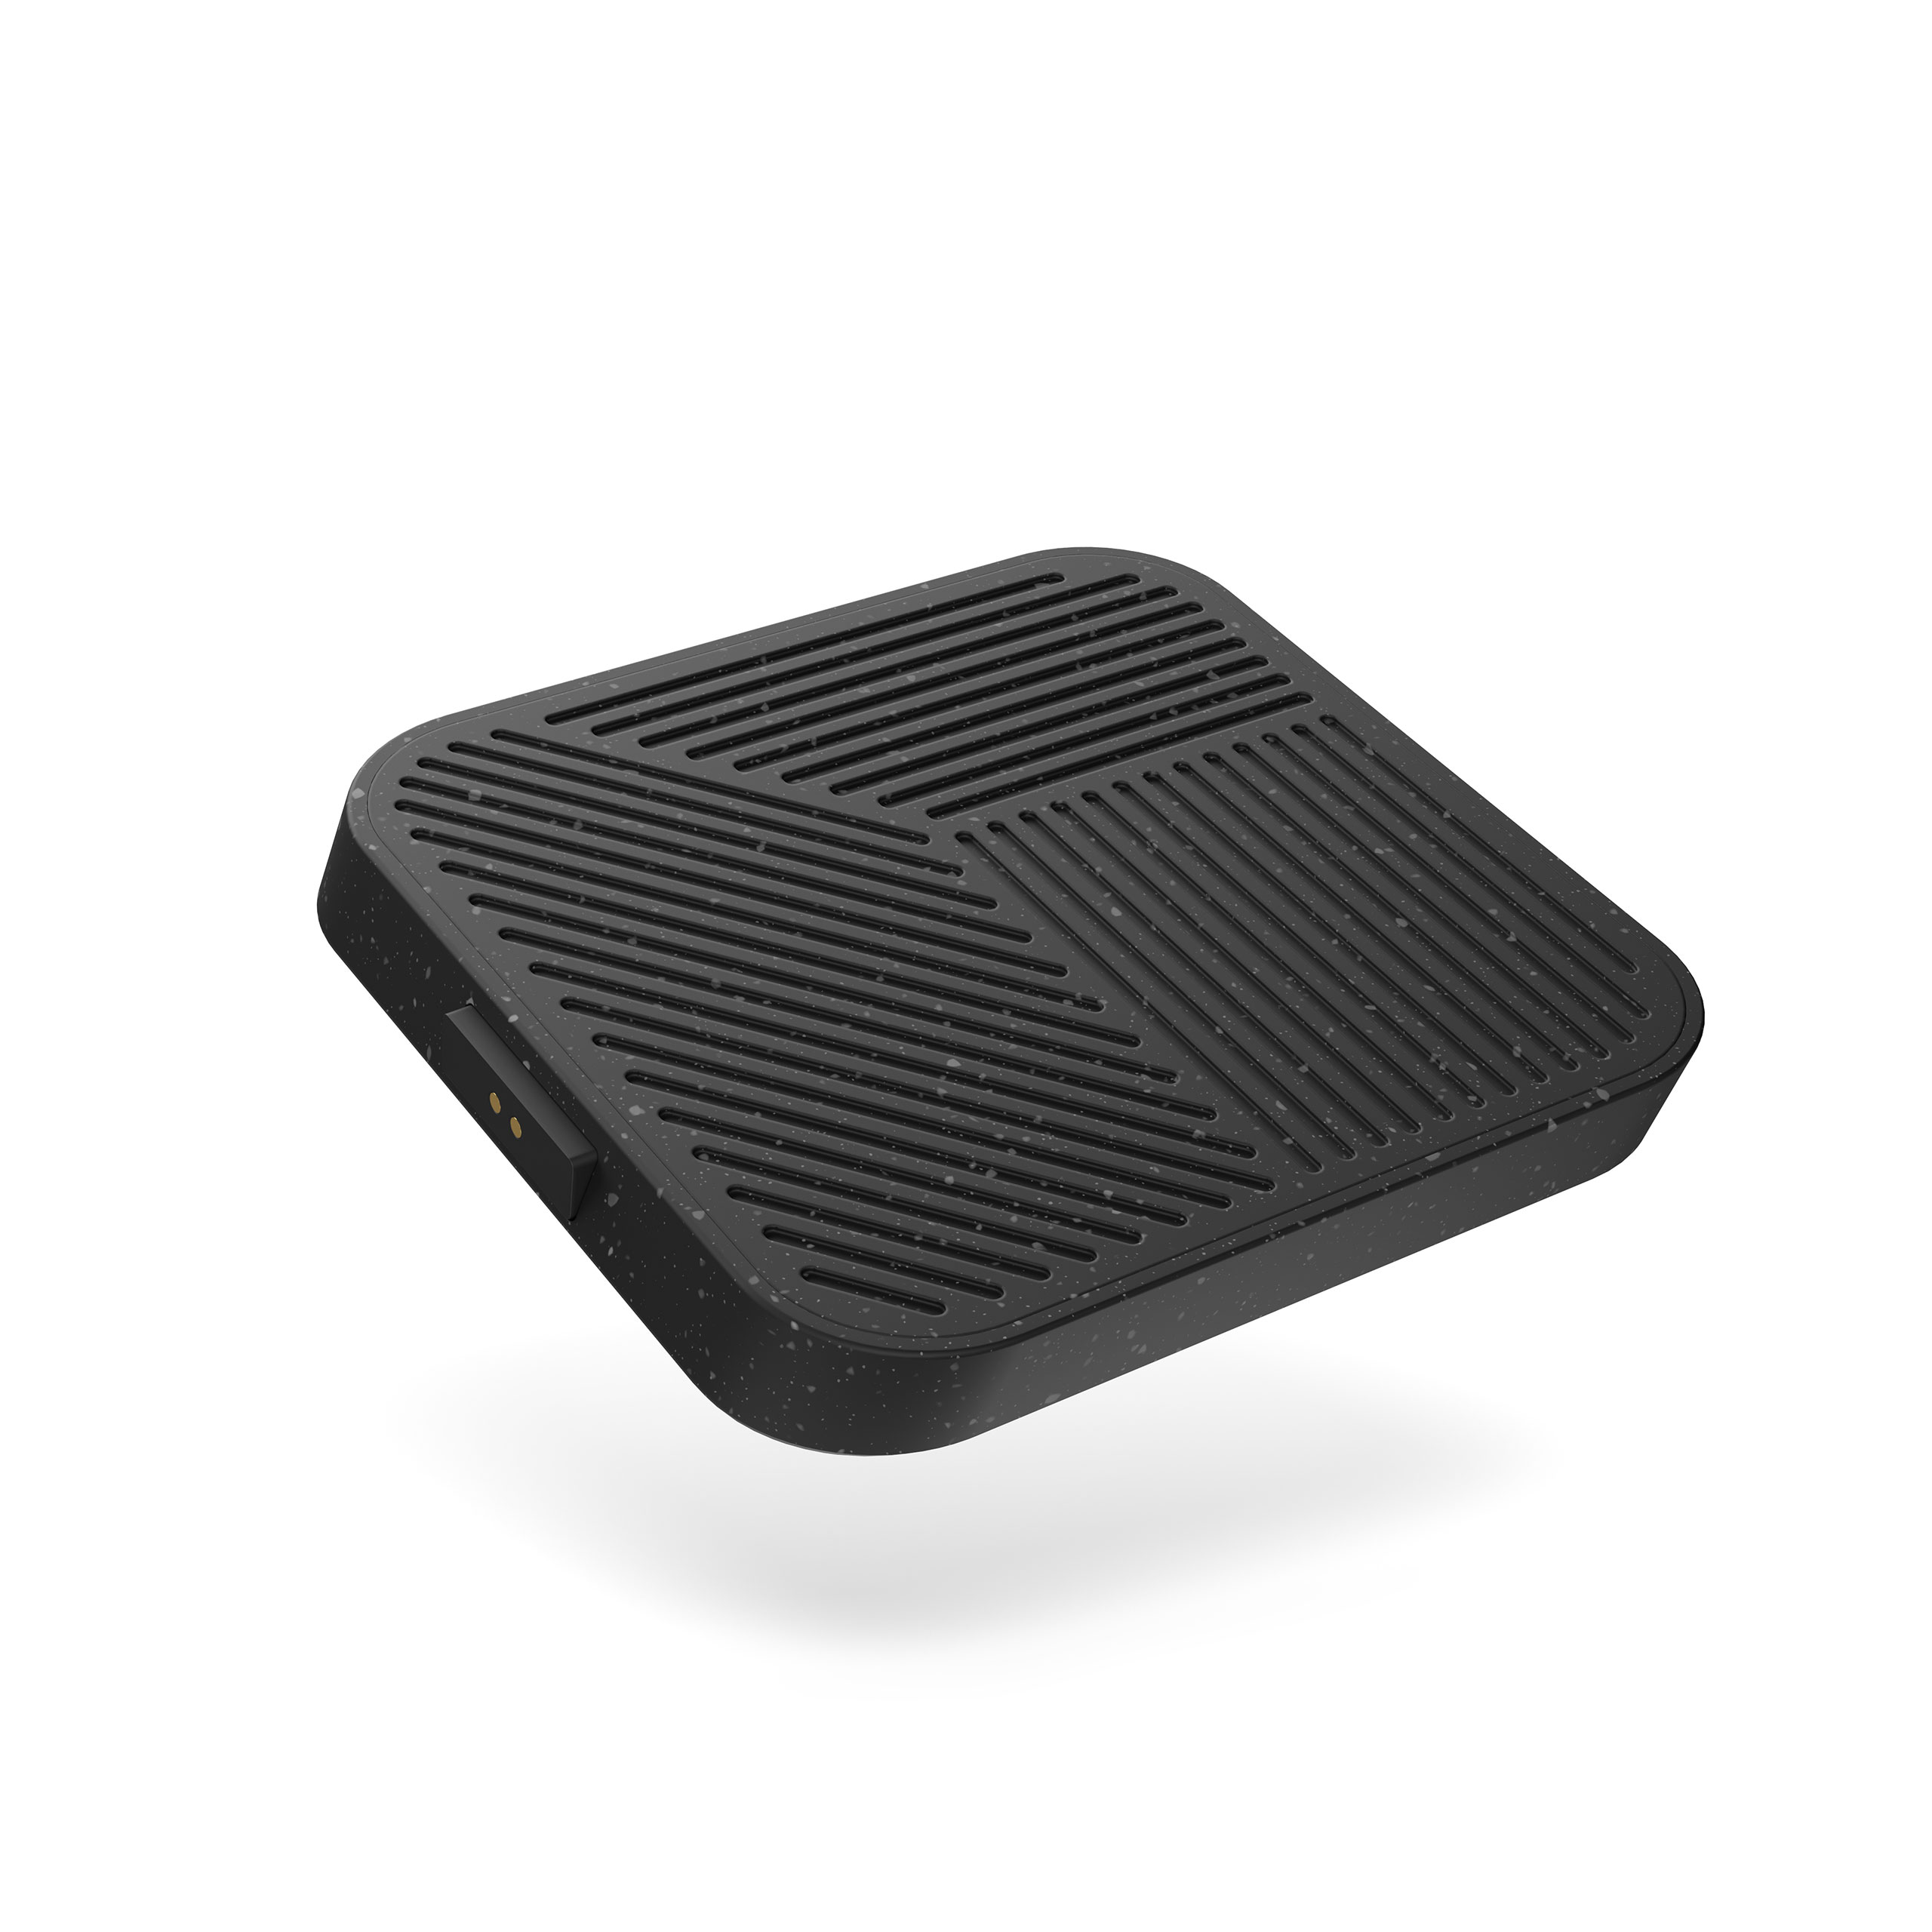 ZEMSC01A Zens Modular Single Wireless Charger Extension Front Side View